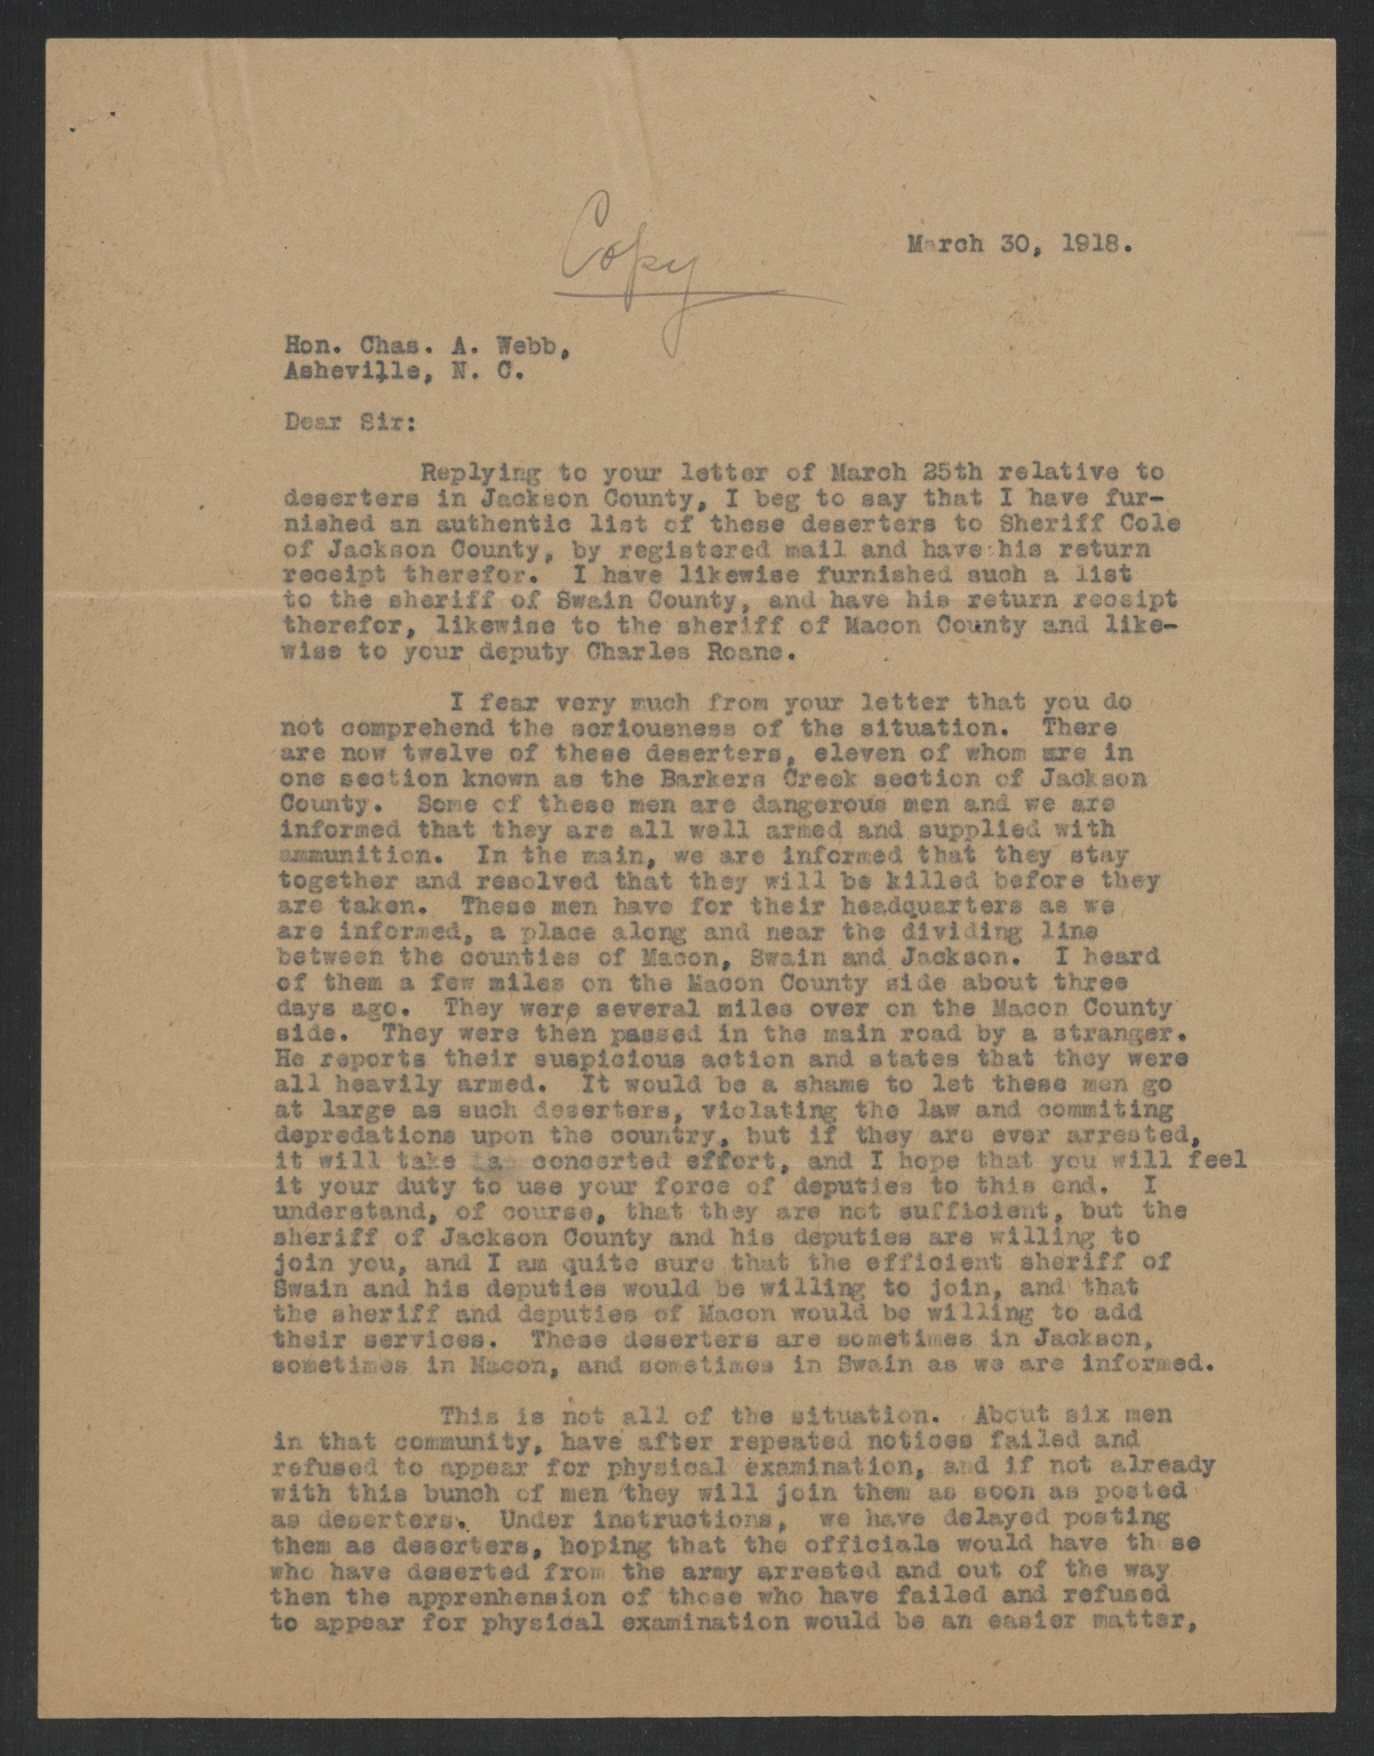 Letter from Coleman C. Cowan to Charles A. Webb, March 30, 1918, page 1